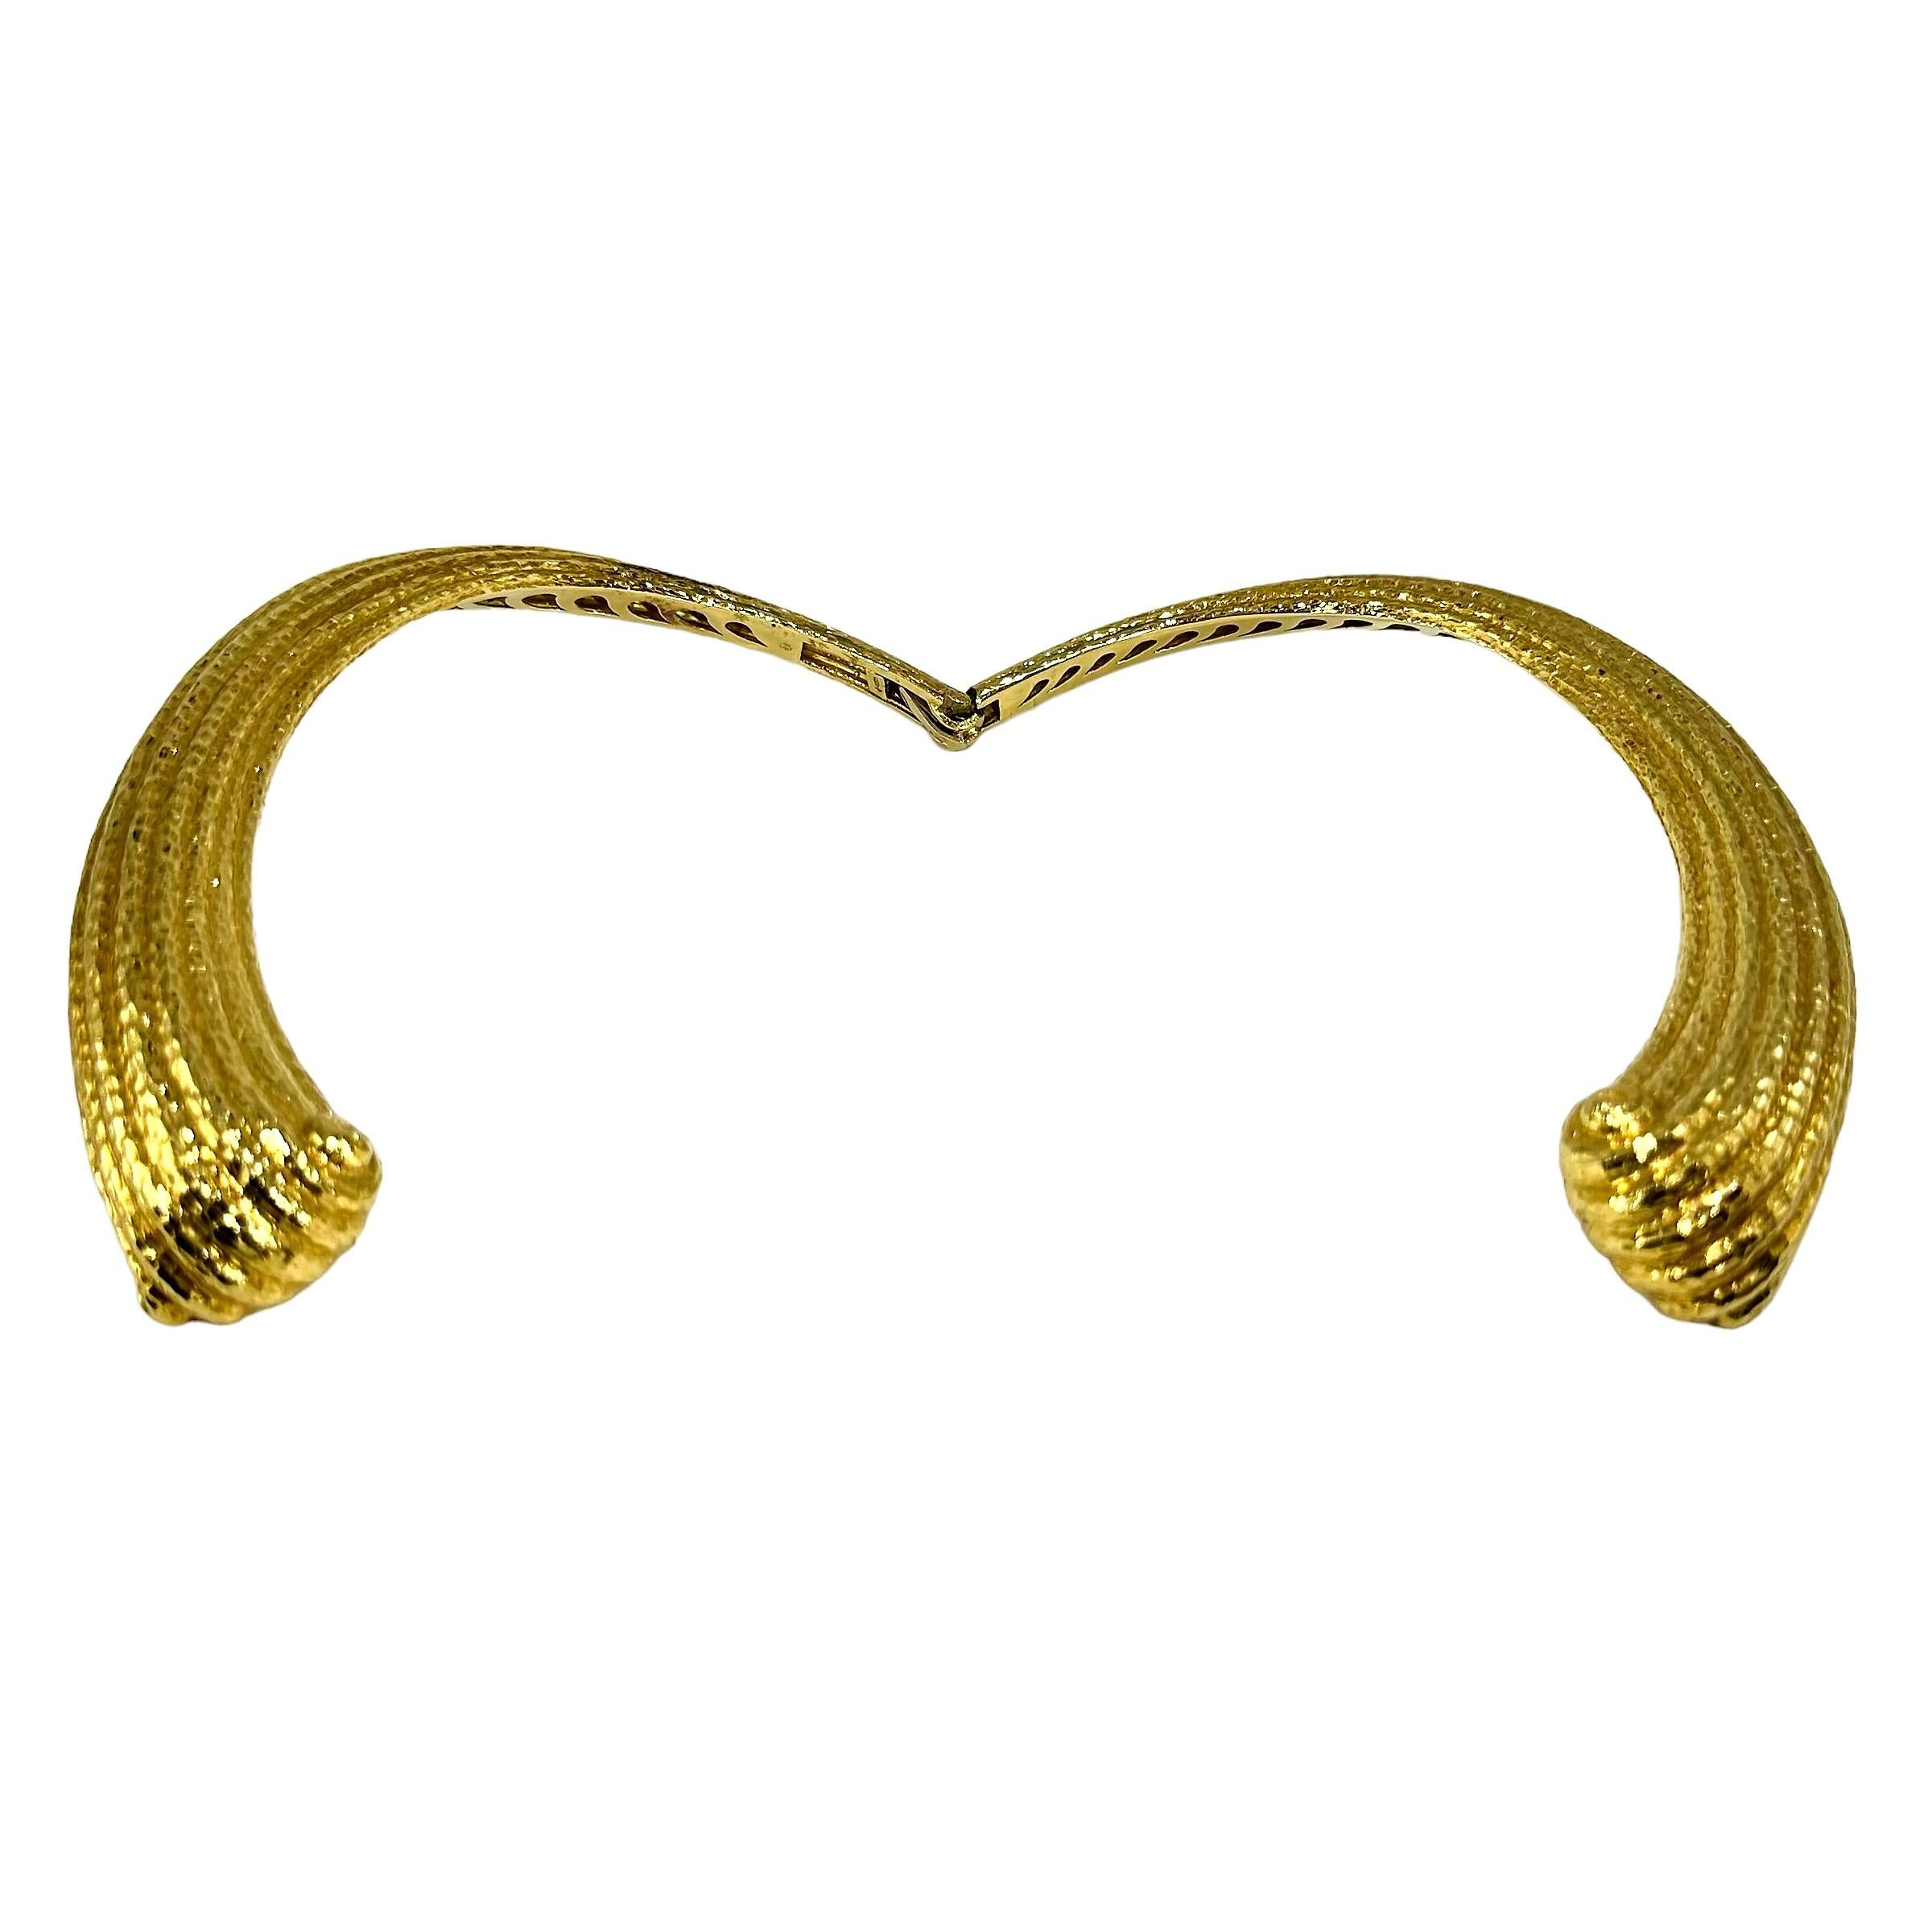 Massive 18K Yellow Gold, Hammered Finish, Italian Scroll Motif Choker Necklace For Sale 2